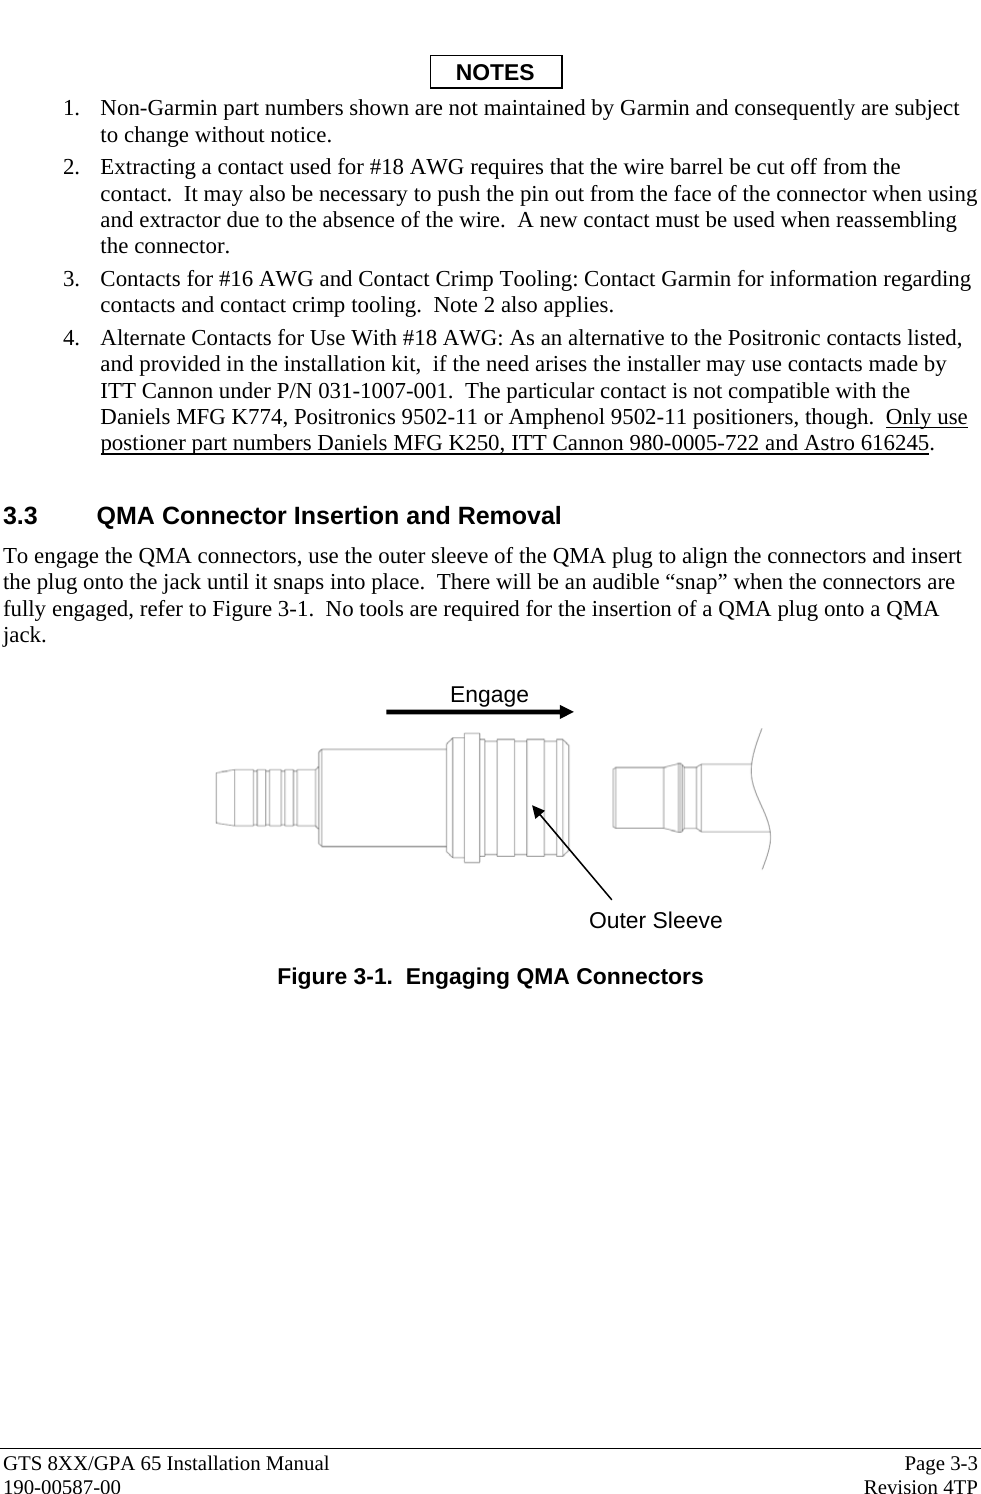  GTS 8XX/GPA 65 Installation Manual  Page 3-3 190-00587-00  Revision 4TP  NOTES 1. Non-Garmin part numbers shown are not maintained by Garmin and consequently are subject to change without notice. 2. Extracting a contact used for #18 AWG requires that the wire barrel be cut off from the contact.  It may also be necessary to push the pin out from the face of the connector when using and extractor due to the absence of the wire.  A new contact must be used when reassembling the connector.   3. Contacts for #16 AWG and Contact Crimp Tooling: Contact Garmin for information regarding contacts and contact crimp tooling.  Note 2 also applies. 4. Alternate Contacts for Use With #18 AWG: As an alternative to the Positronic contacts listed, and provided in the installation kit,  if the need arises the installer may use contacts made by ITT Cannon under P/N 031-1007-001.  The particular contact is not compatible with the Daniels MFG K774, Positronics 9502-11 or Amphenol 9502-11 positioners, though.  Only use postioner part numbers Daniels MFG K250, ITT Cannon 980-0005-722 and Astro 616245.   3.3  QMA Connector Insertion and Removal To engage the QMA connectors, use the outer sleeve of the QMA plug to align the connectors and insert the plug onto the jack until it snaps into place.  There will be an audible “snap” when the connectors are fully engaged, refer to Figure 3-1.  No tools are required for the insertion of a QMA plug onto a QMA jack.      Figure 3-1.  Engaging QMA Connectors Engage Outer Sleeve 